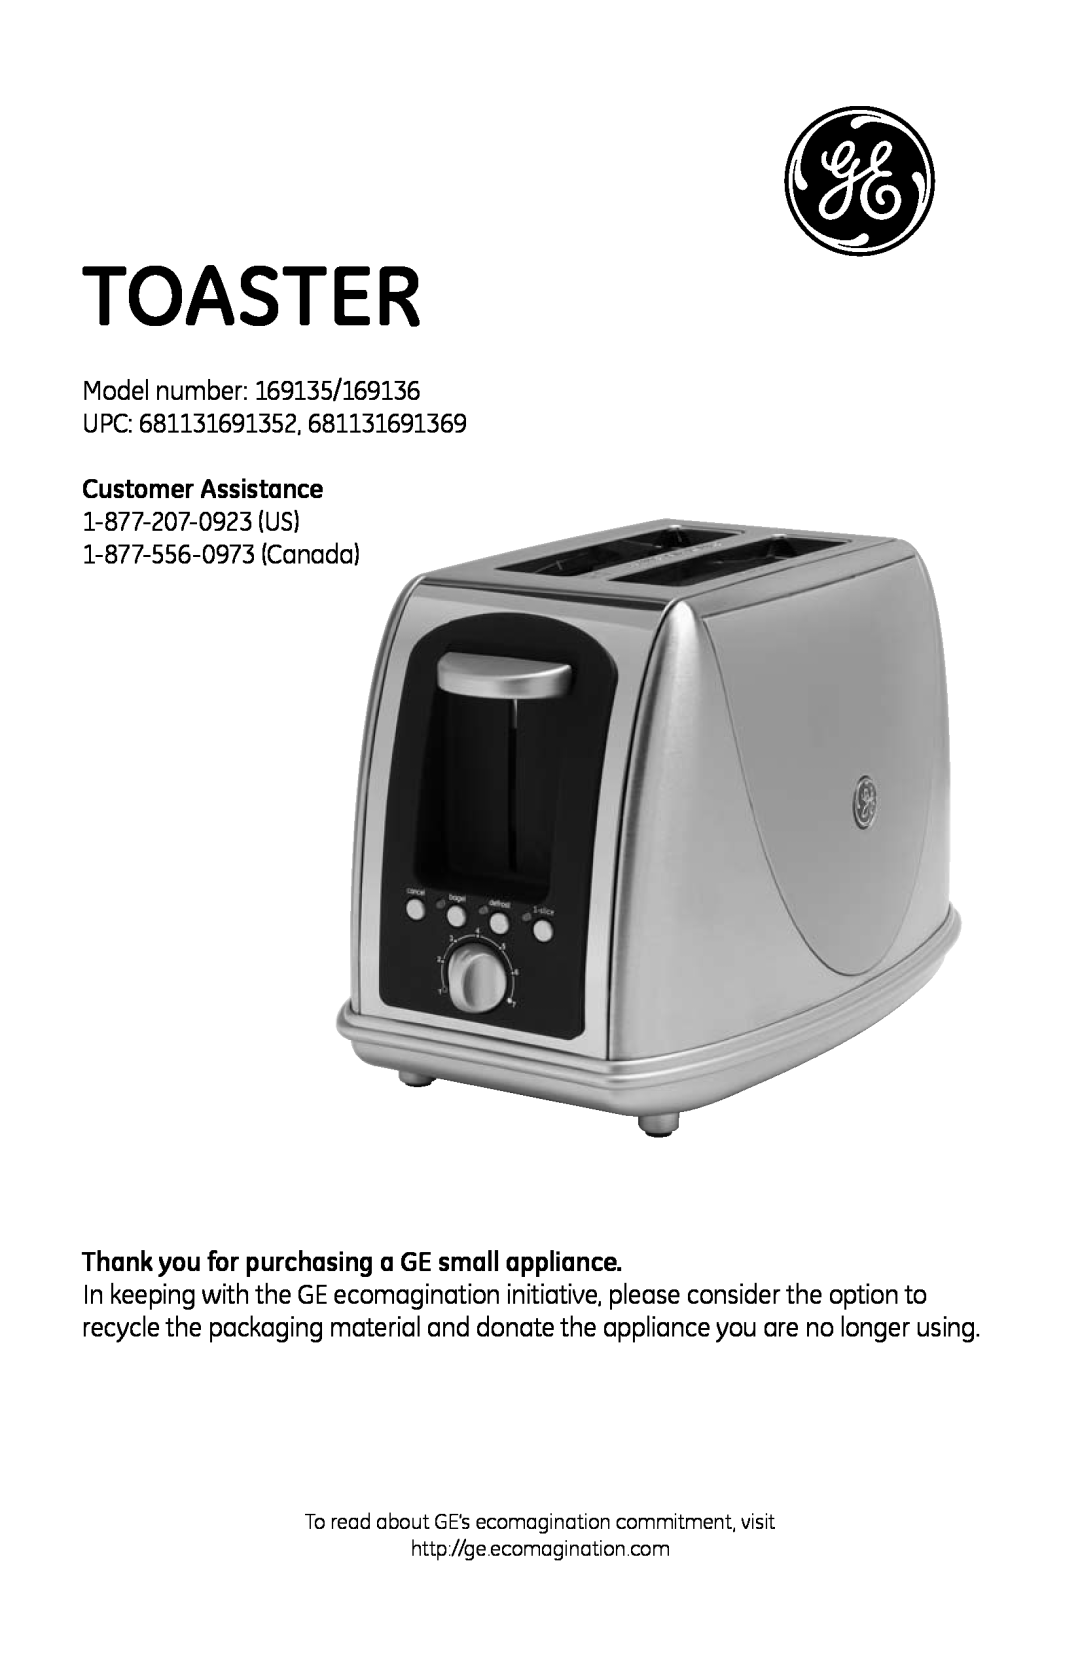 GE 169075, 169135 manual Thank you for purchasing a GE small appliance, toaster, Customer Assistance 1-877-207-0923US 